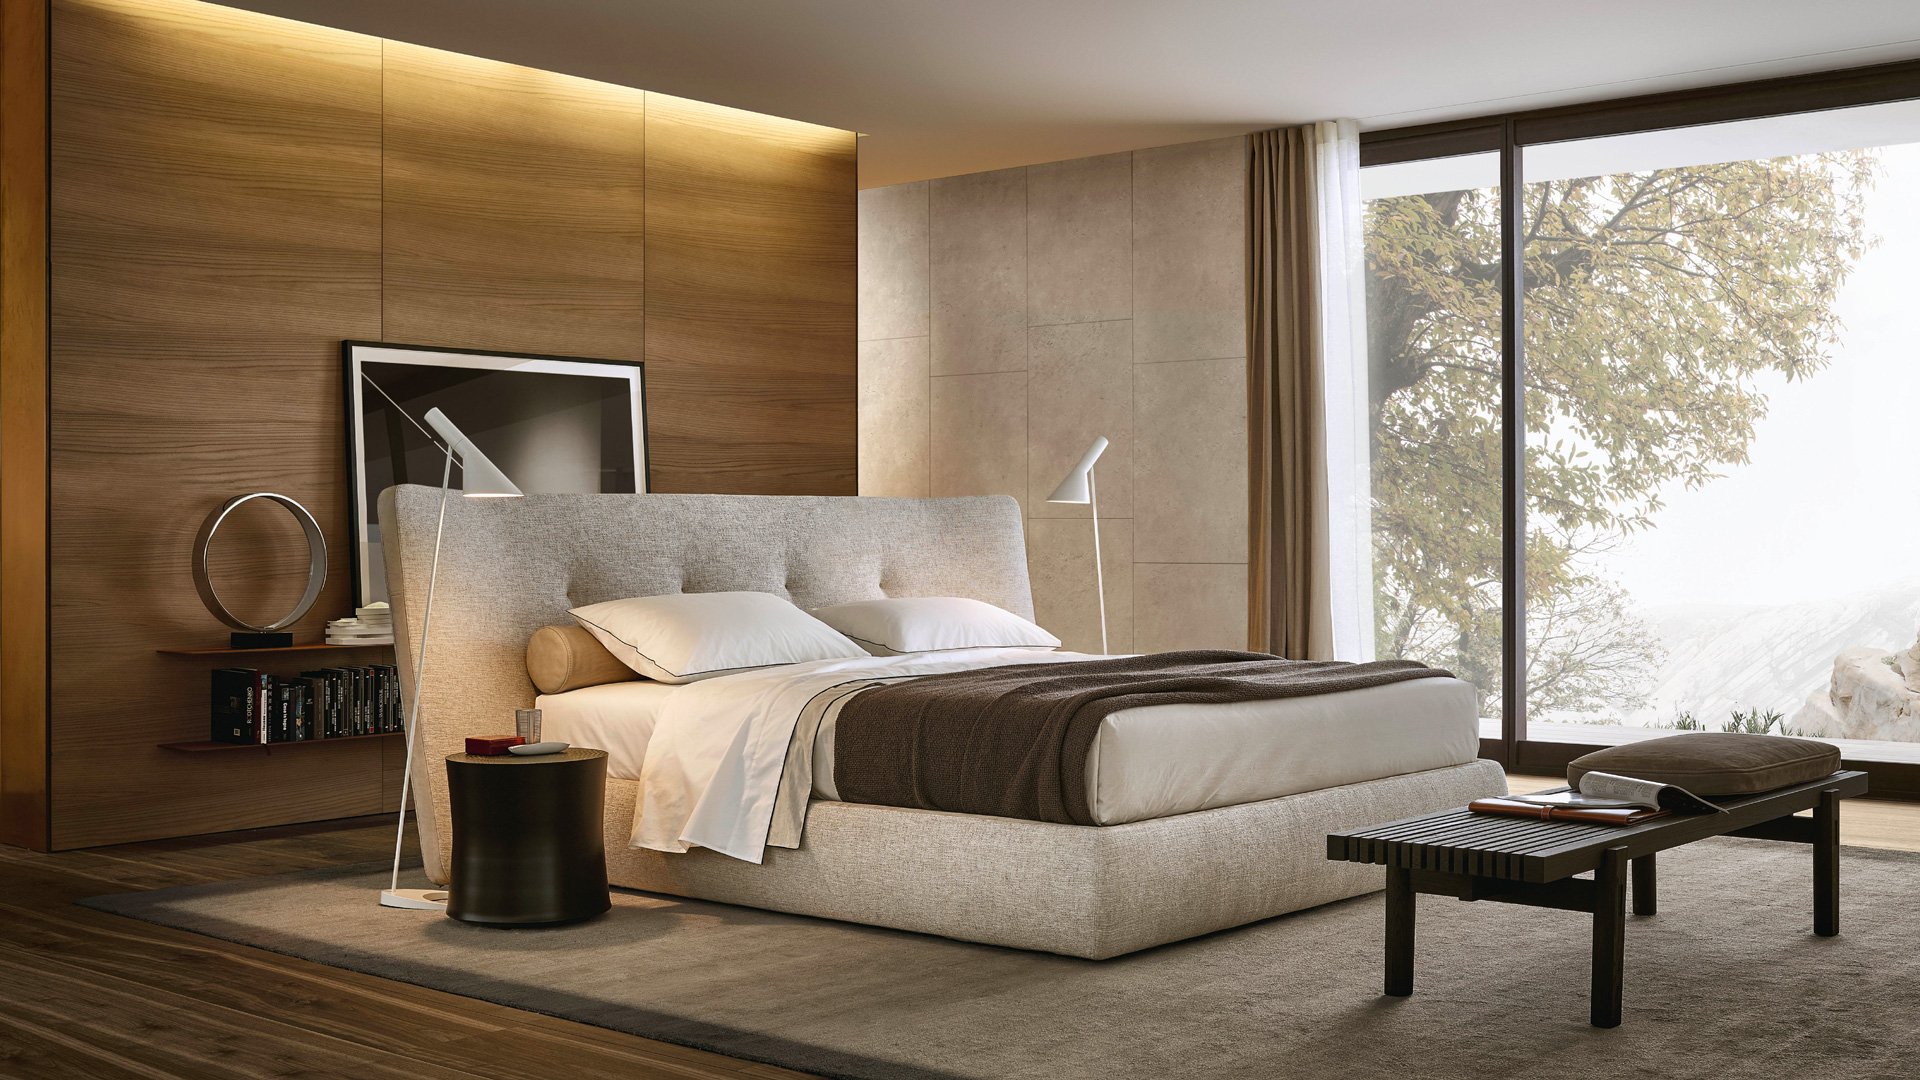 Poliform beds bedroom furniture italian cyprus Takis Angelides Furnihome beds with storage